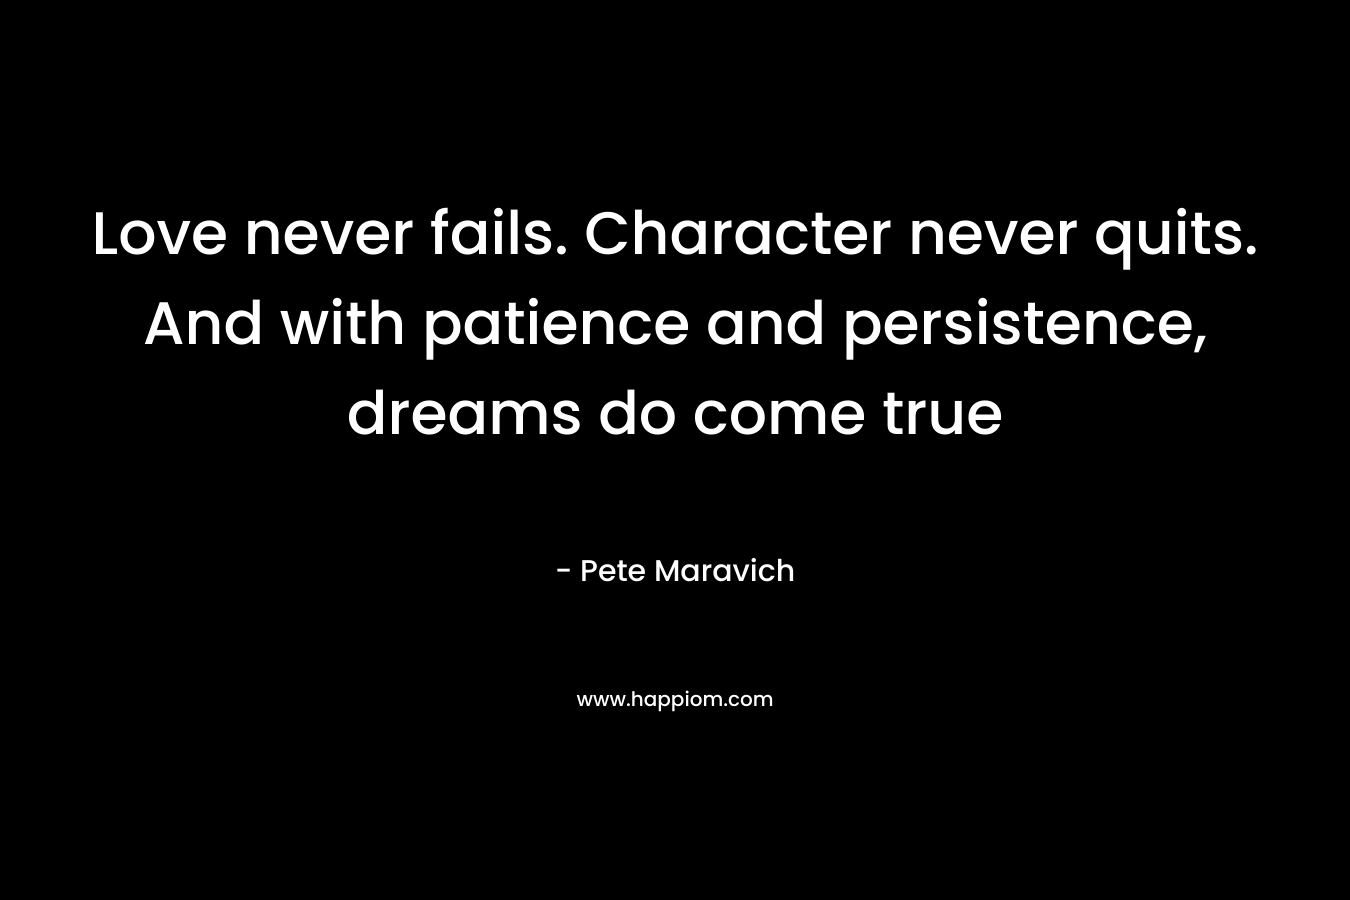 Love never fails. Character never quits. And with patience and persistence, dreams do come true – Pete Maravich